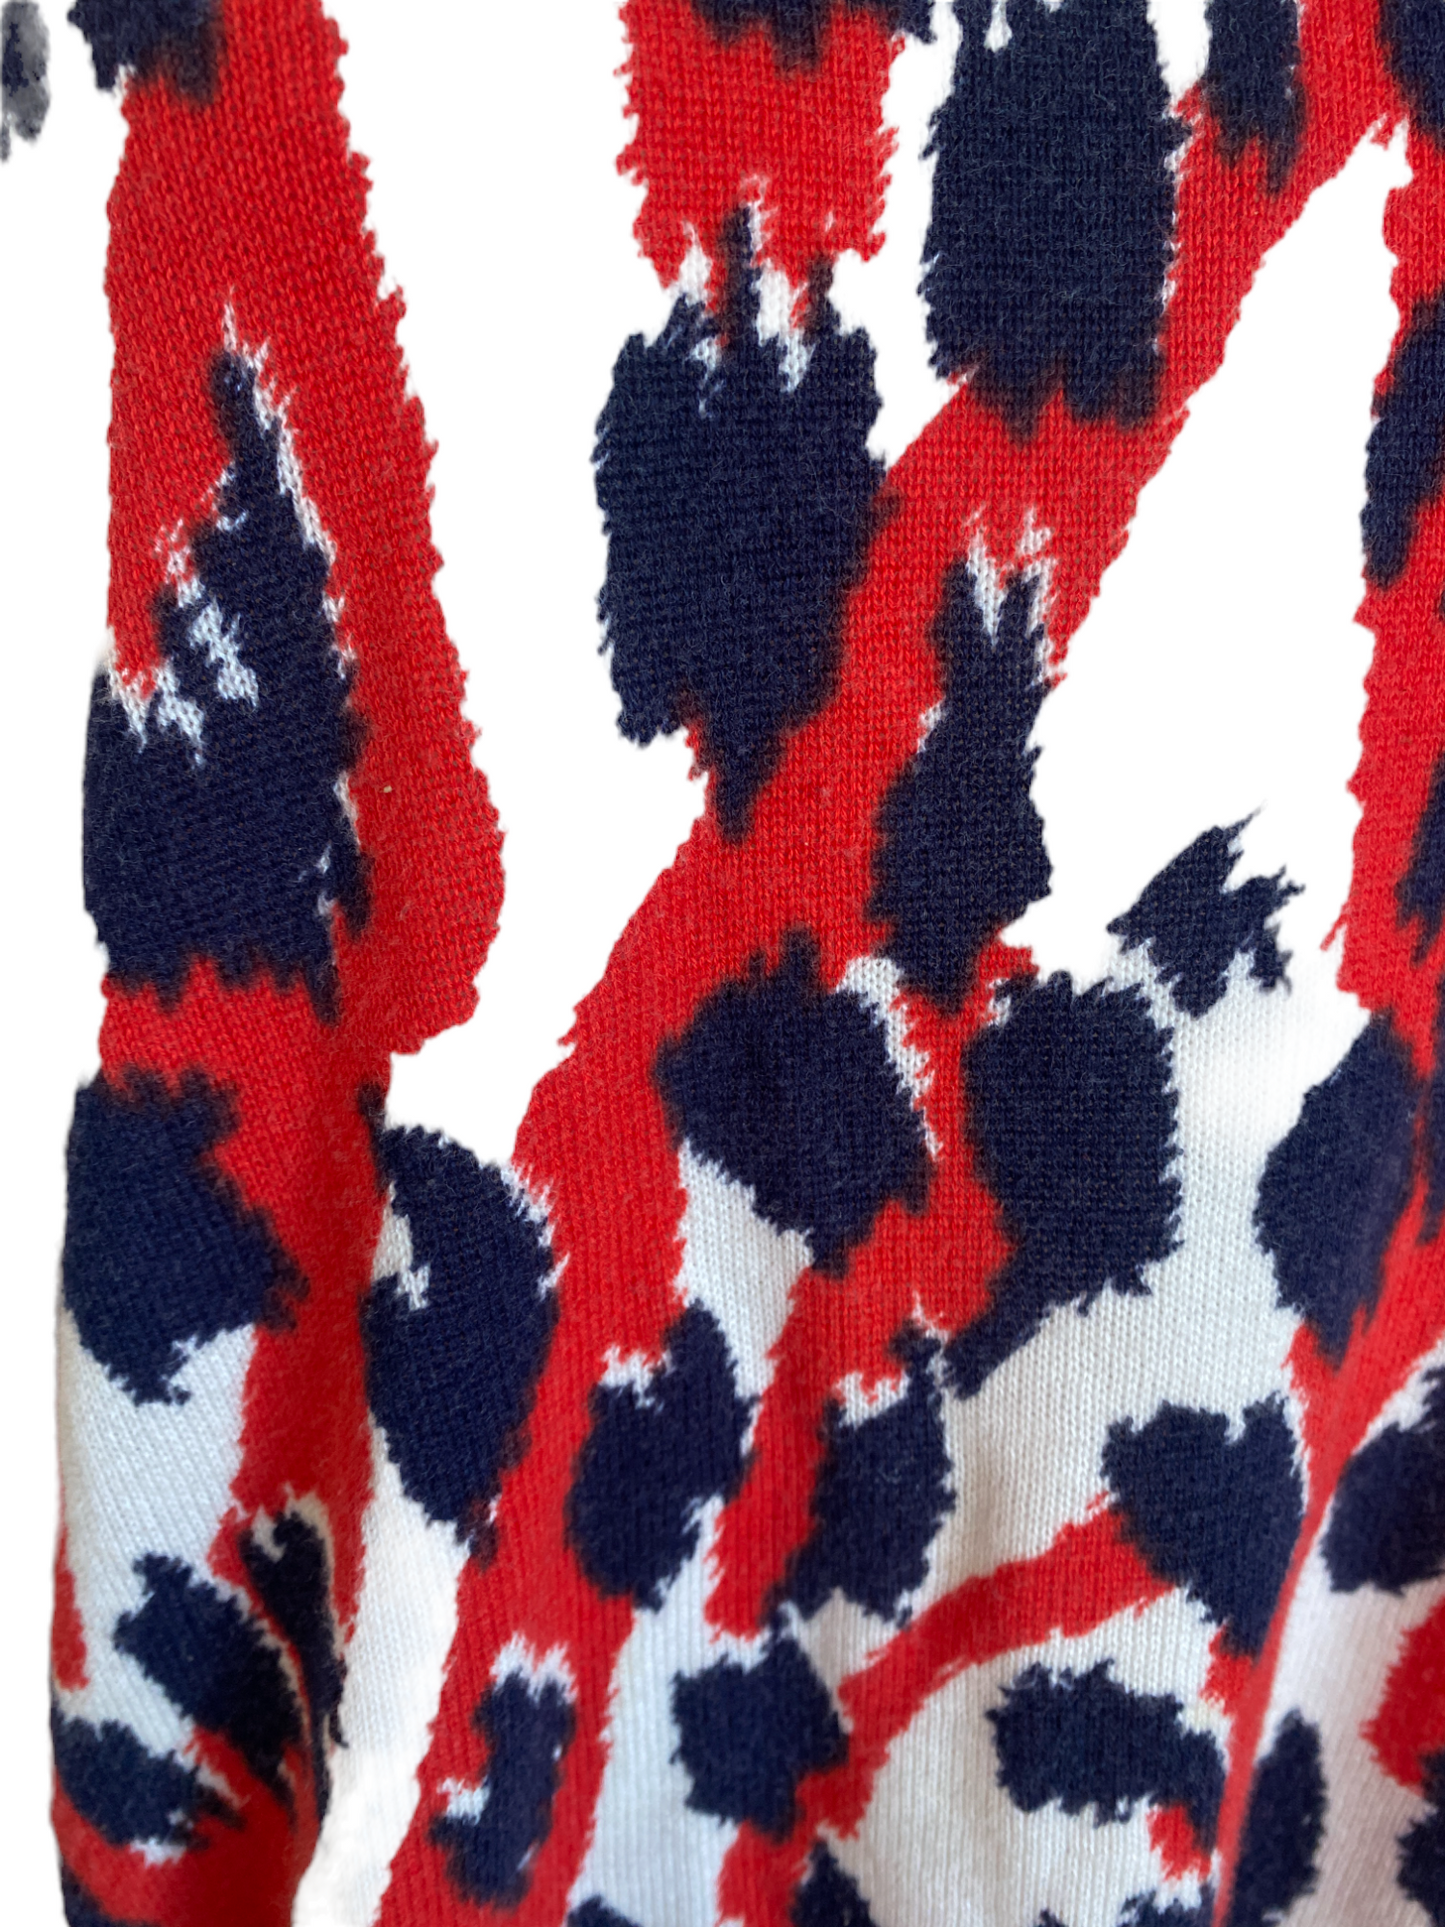 C&M Camilla and Marc Jumper/Sweater | Sz M, Oversized, Red/White/Navy, Cotton